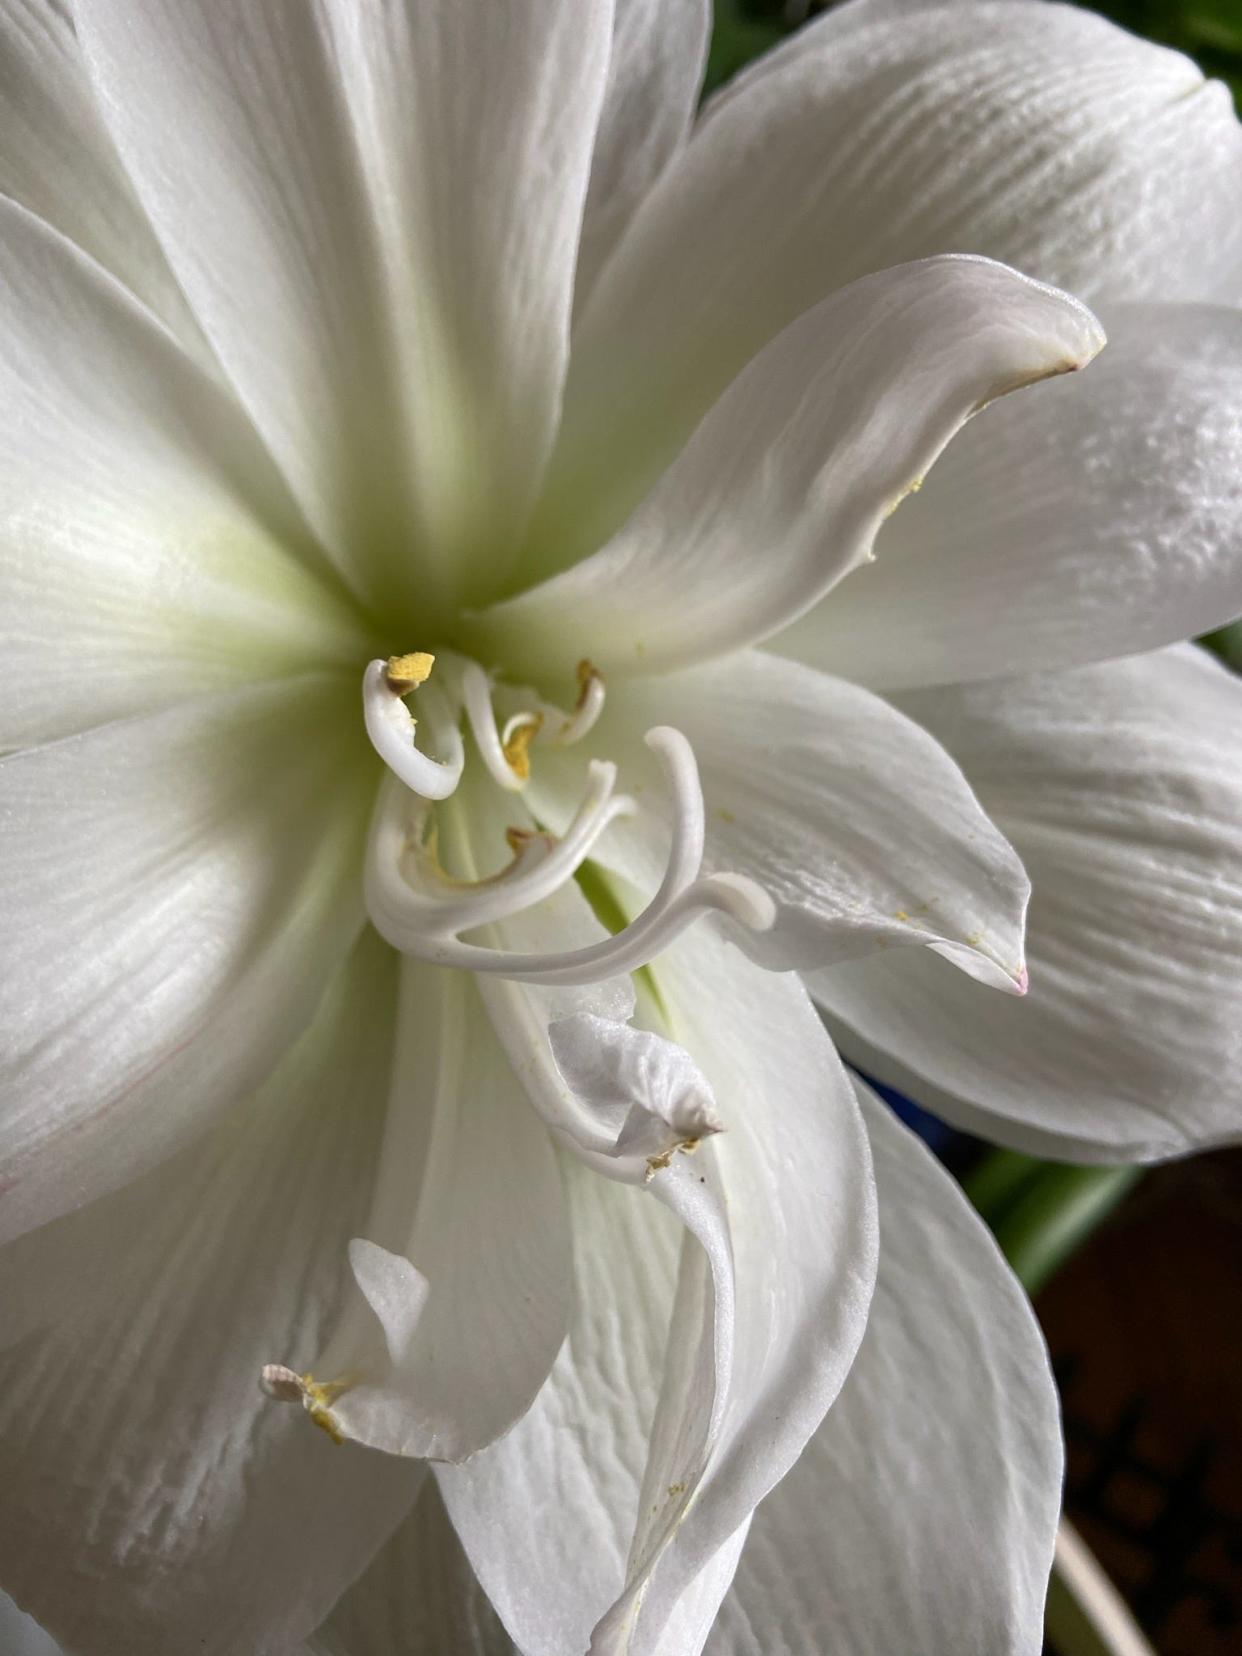 Meet "White Nymph" up-close and personal, a double white amaryllis with 10-inch wide blooms.